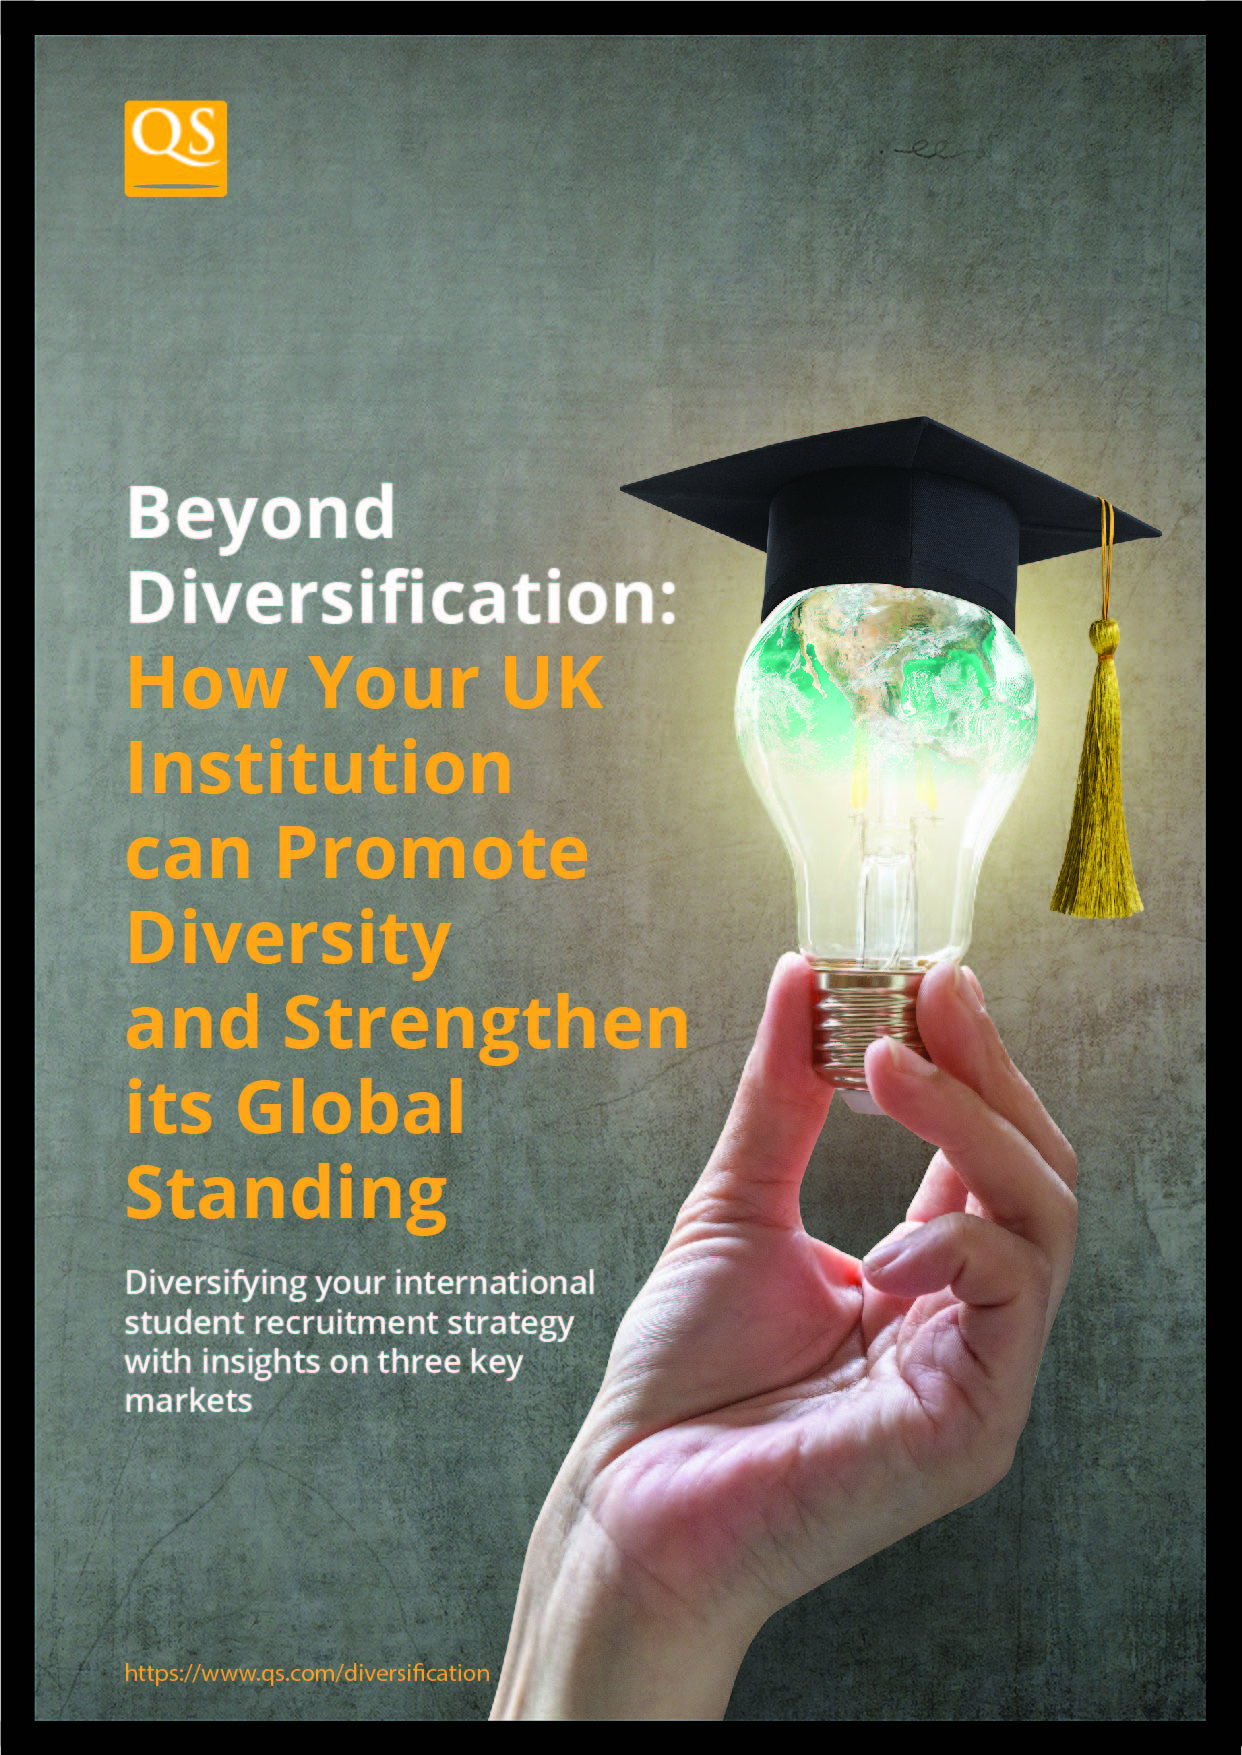 UK-version-Beyond-Diversification-How-to-Promote-Diversity-and-Strengthen-Your-Global-Standing